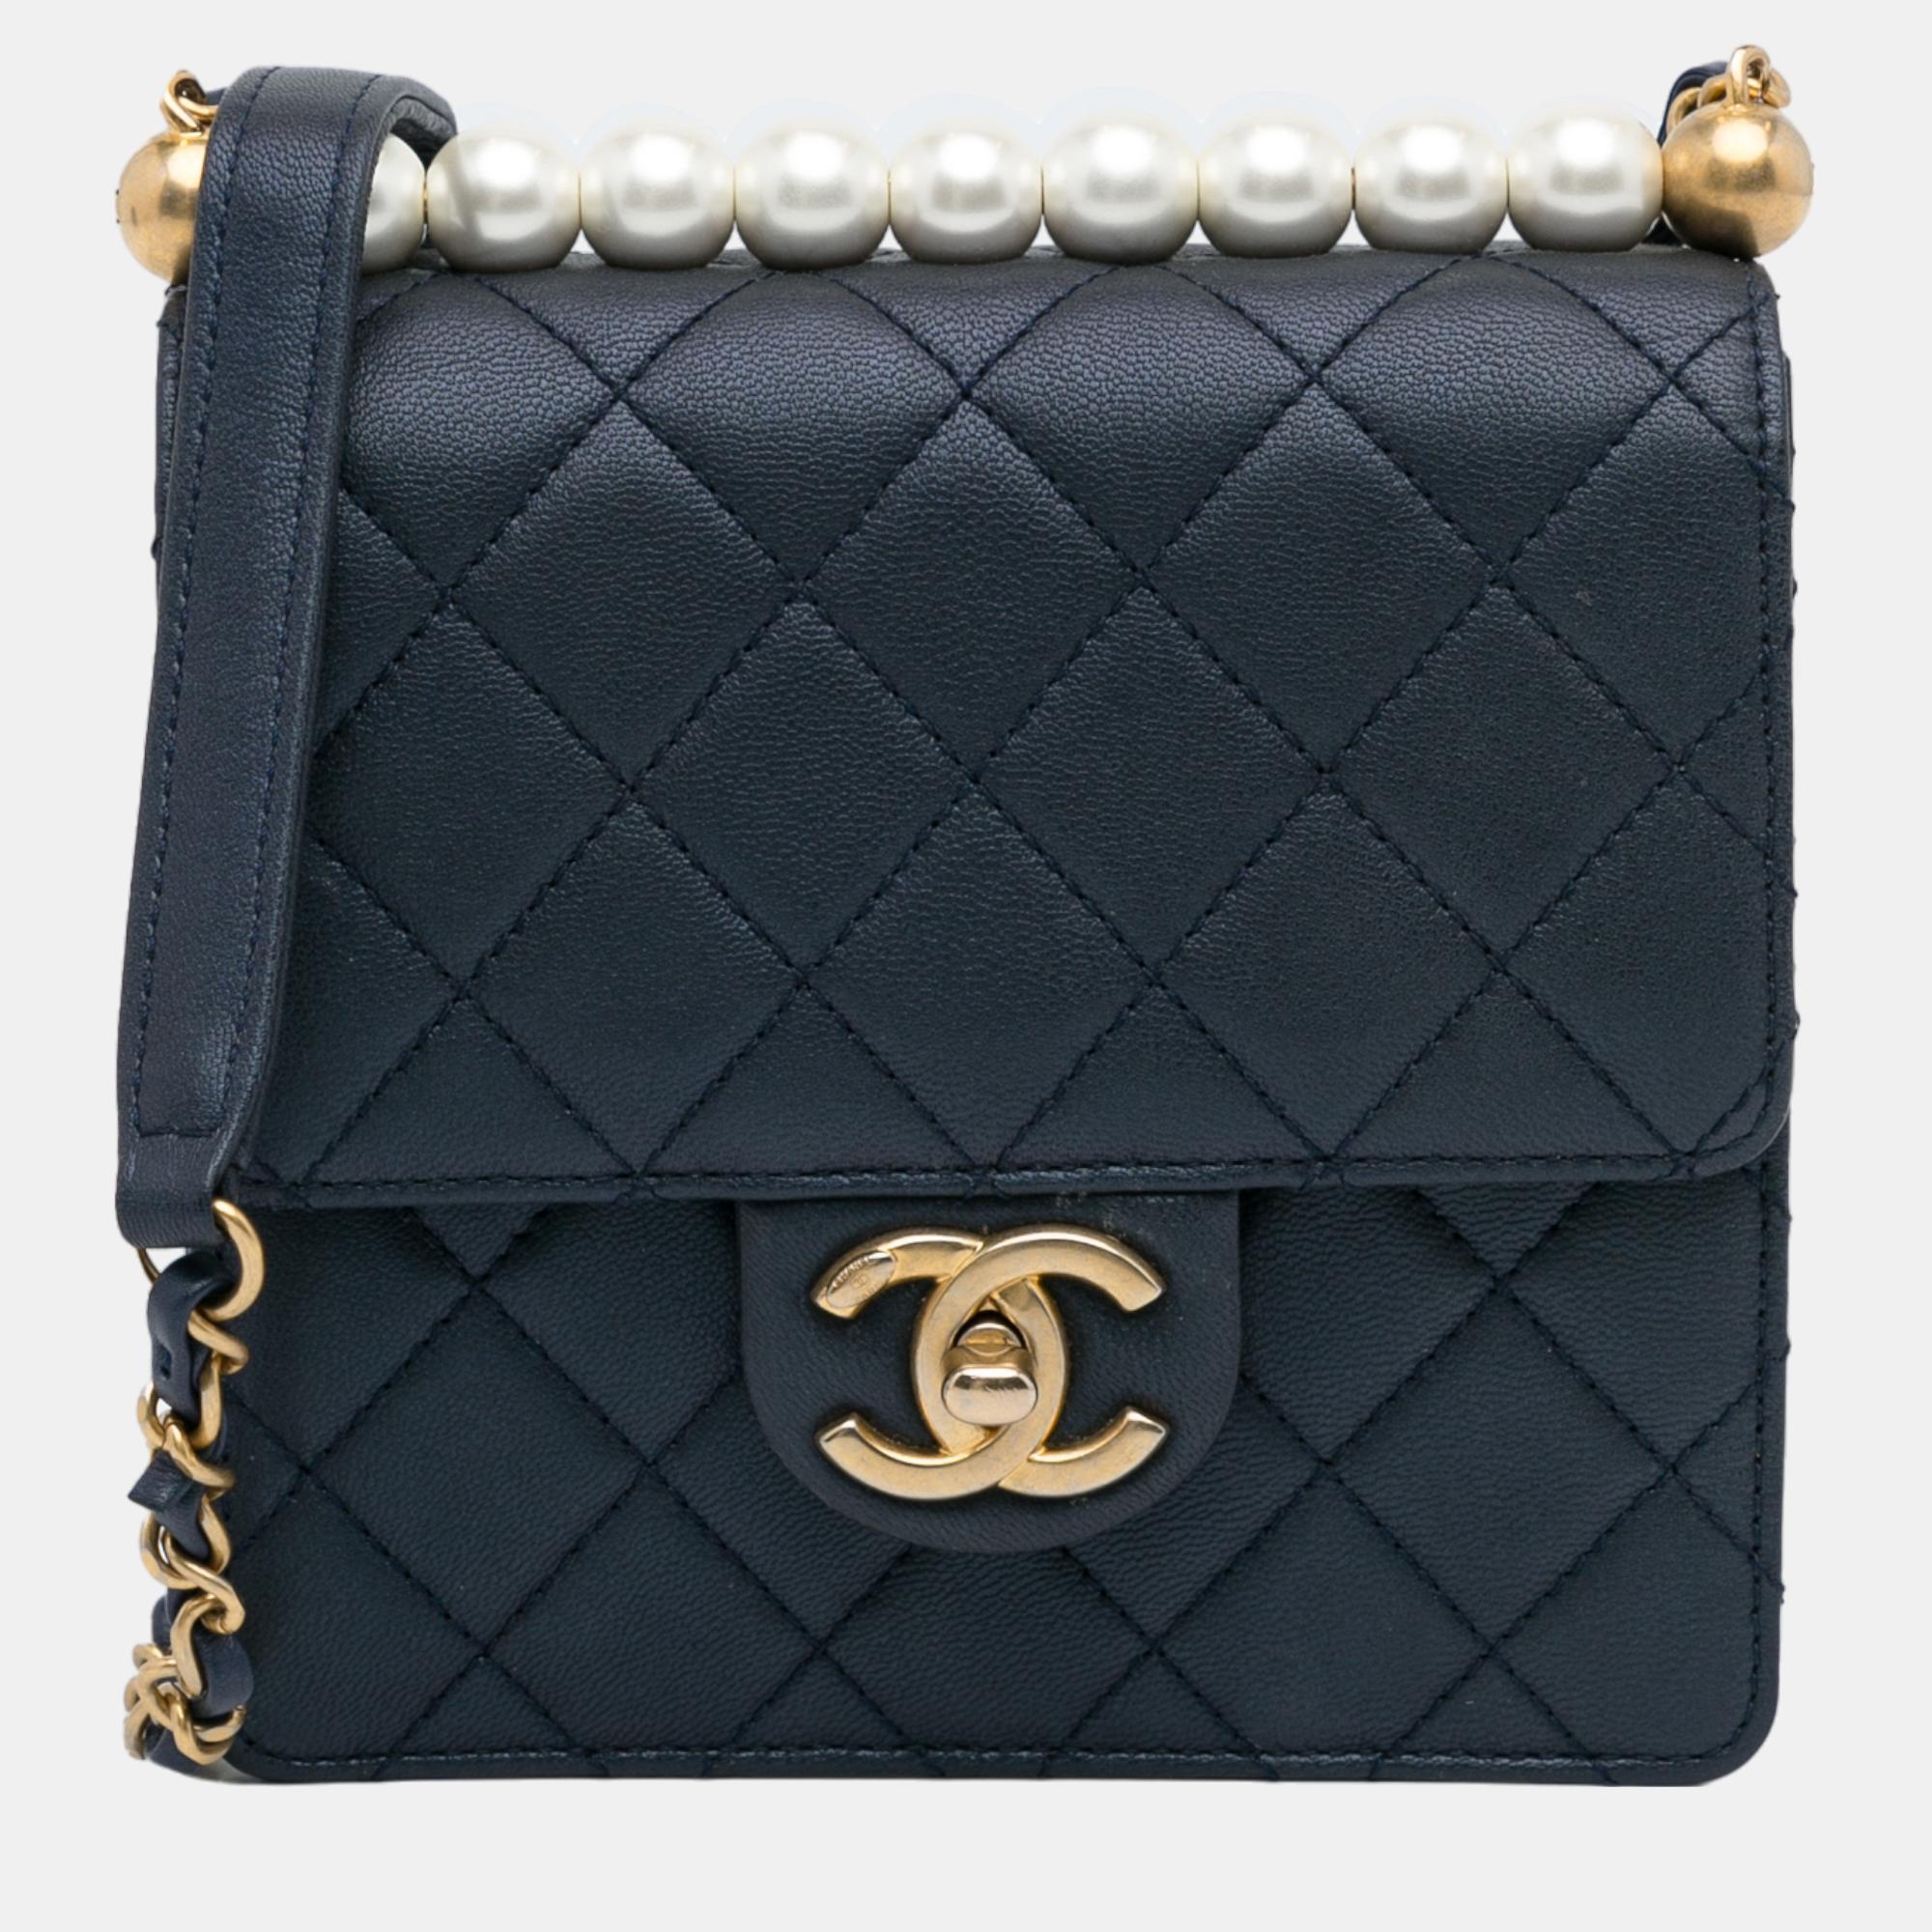 Chanel Navy Blue Small Chic Pearls Flap Bag